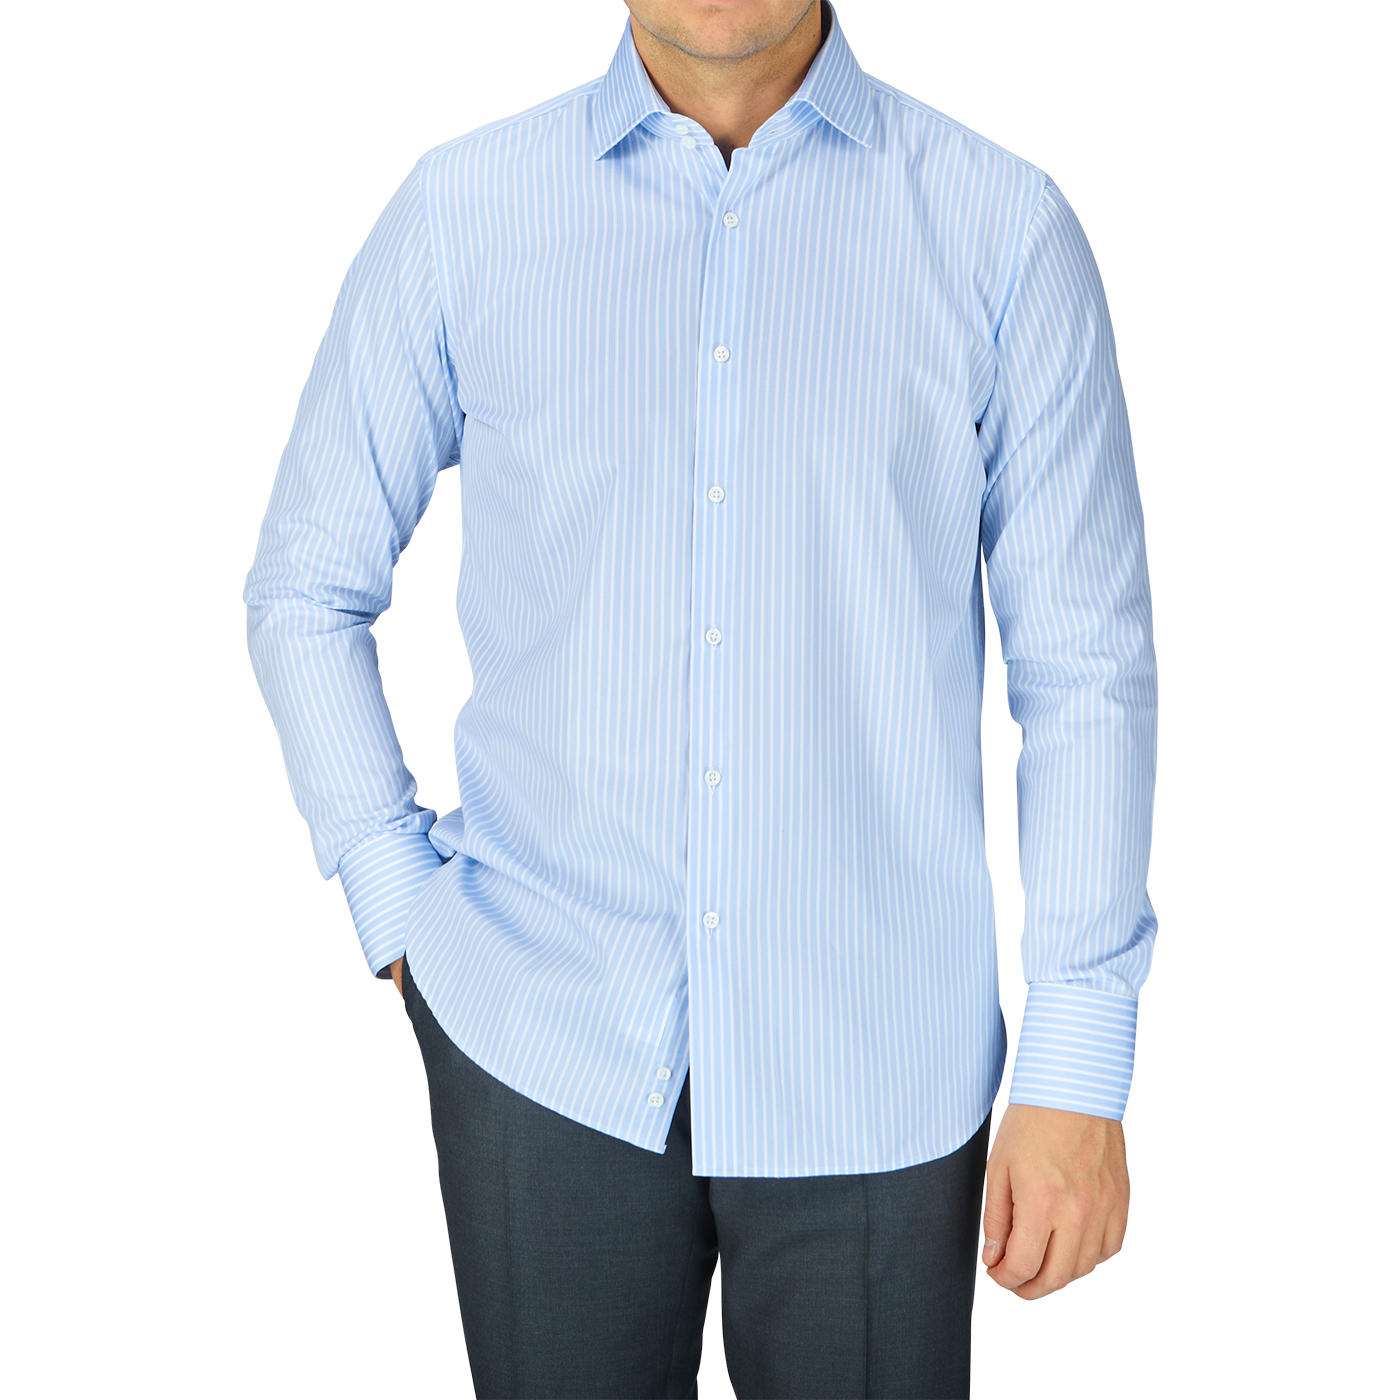 A man adorned in a Blue White Striped Cotton Single Cuff Shirt from Alexander Kraft Monte Carlo.